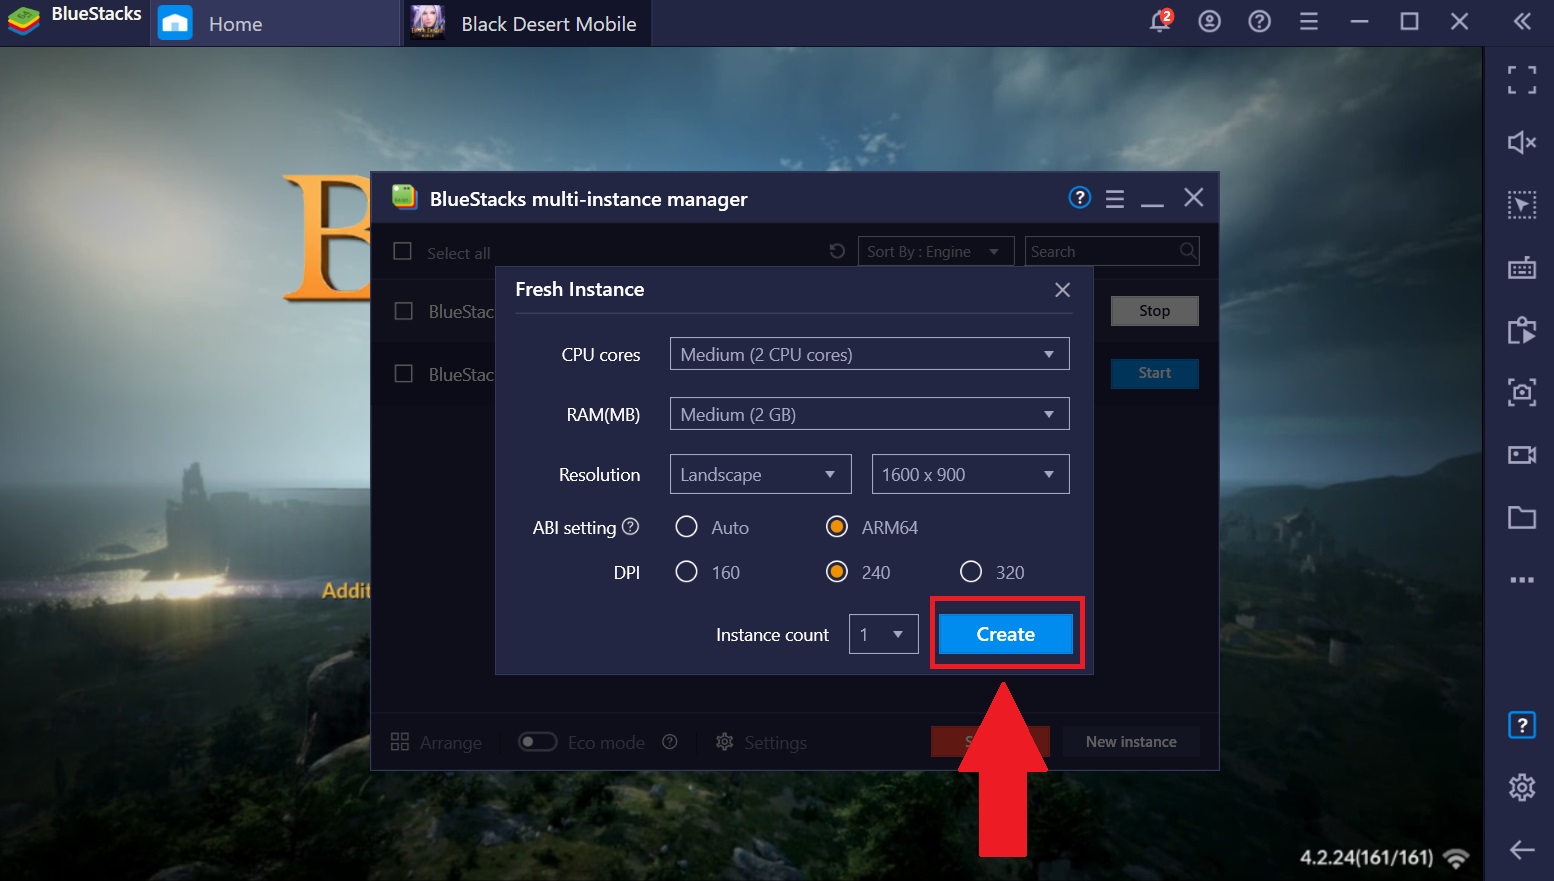 how to update bluestacks android version to 6.0